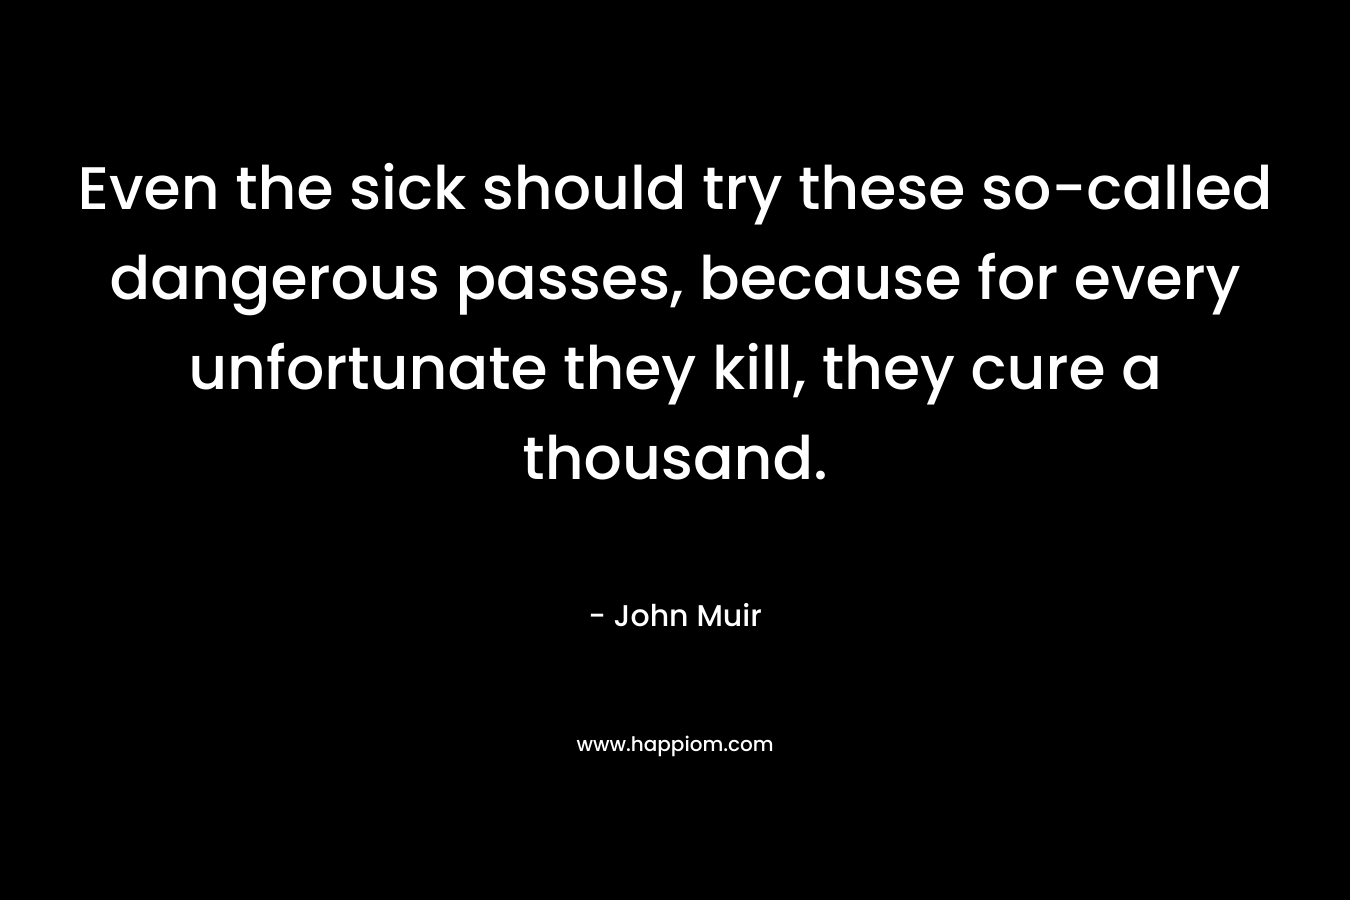 Even the sick should try these so-called dangerous passes, because for every unfortunate they kill, they cure a thousand.